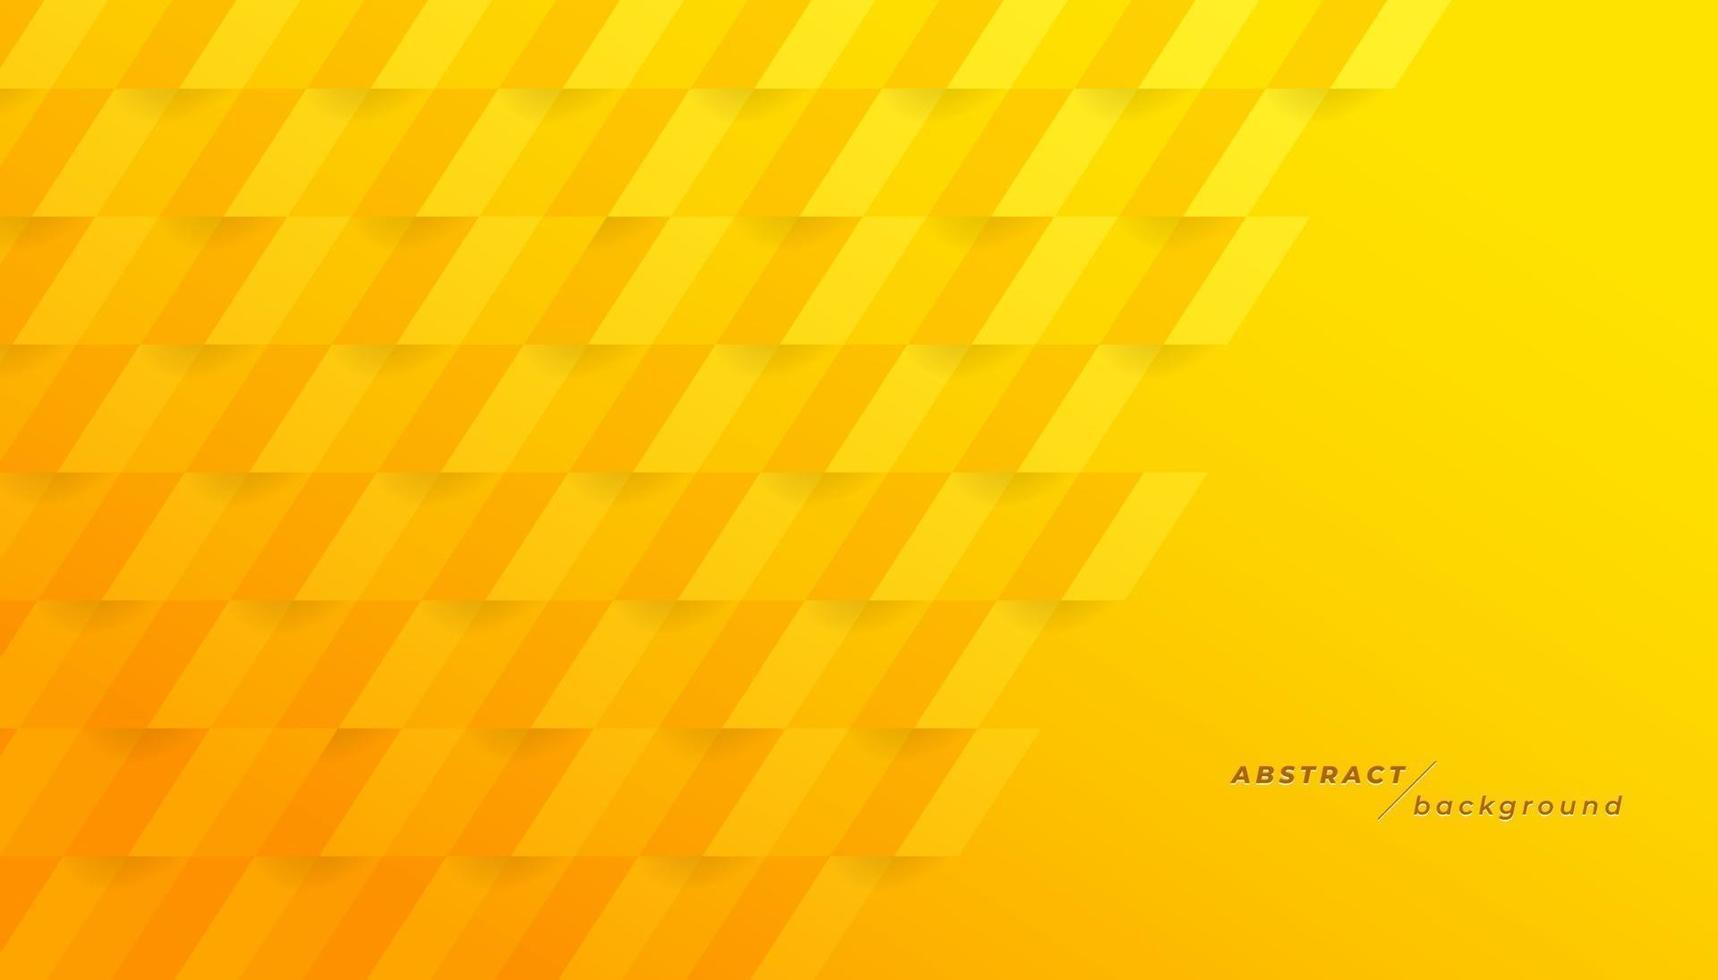 Abstract yellow geometric background. Modern design background for cover design, poster, banner. vector